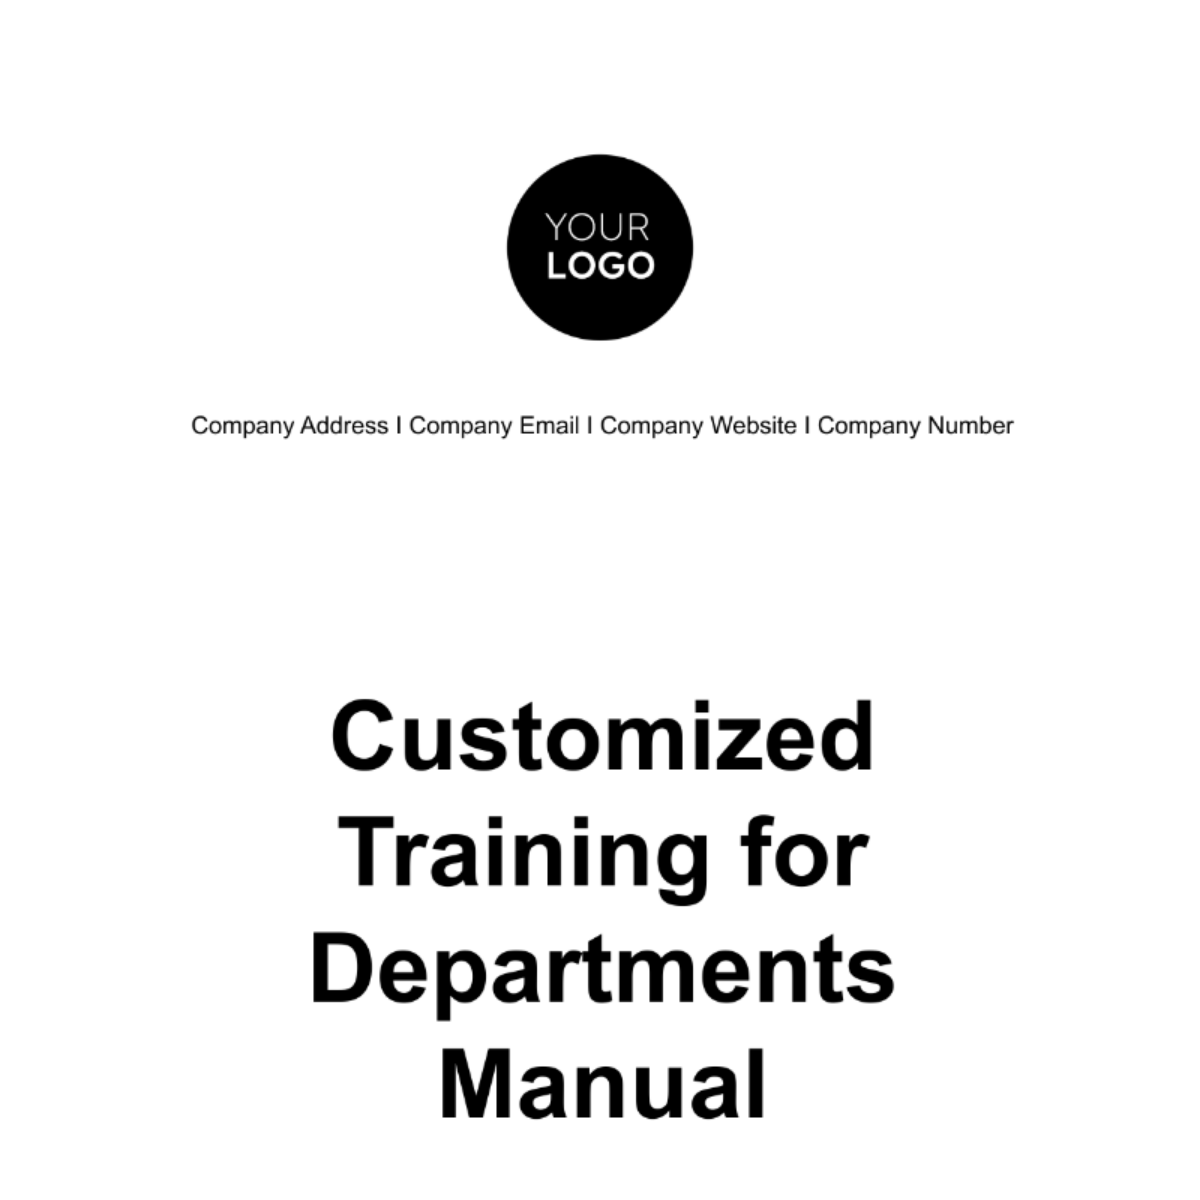 Customized Training for Departments Manual HR Template